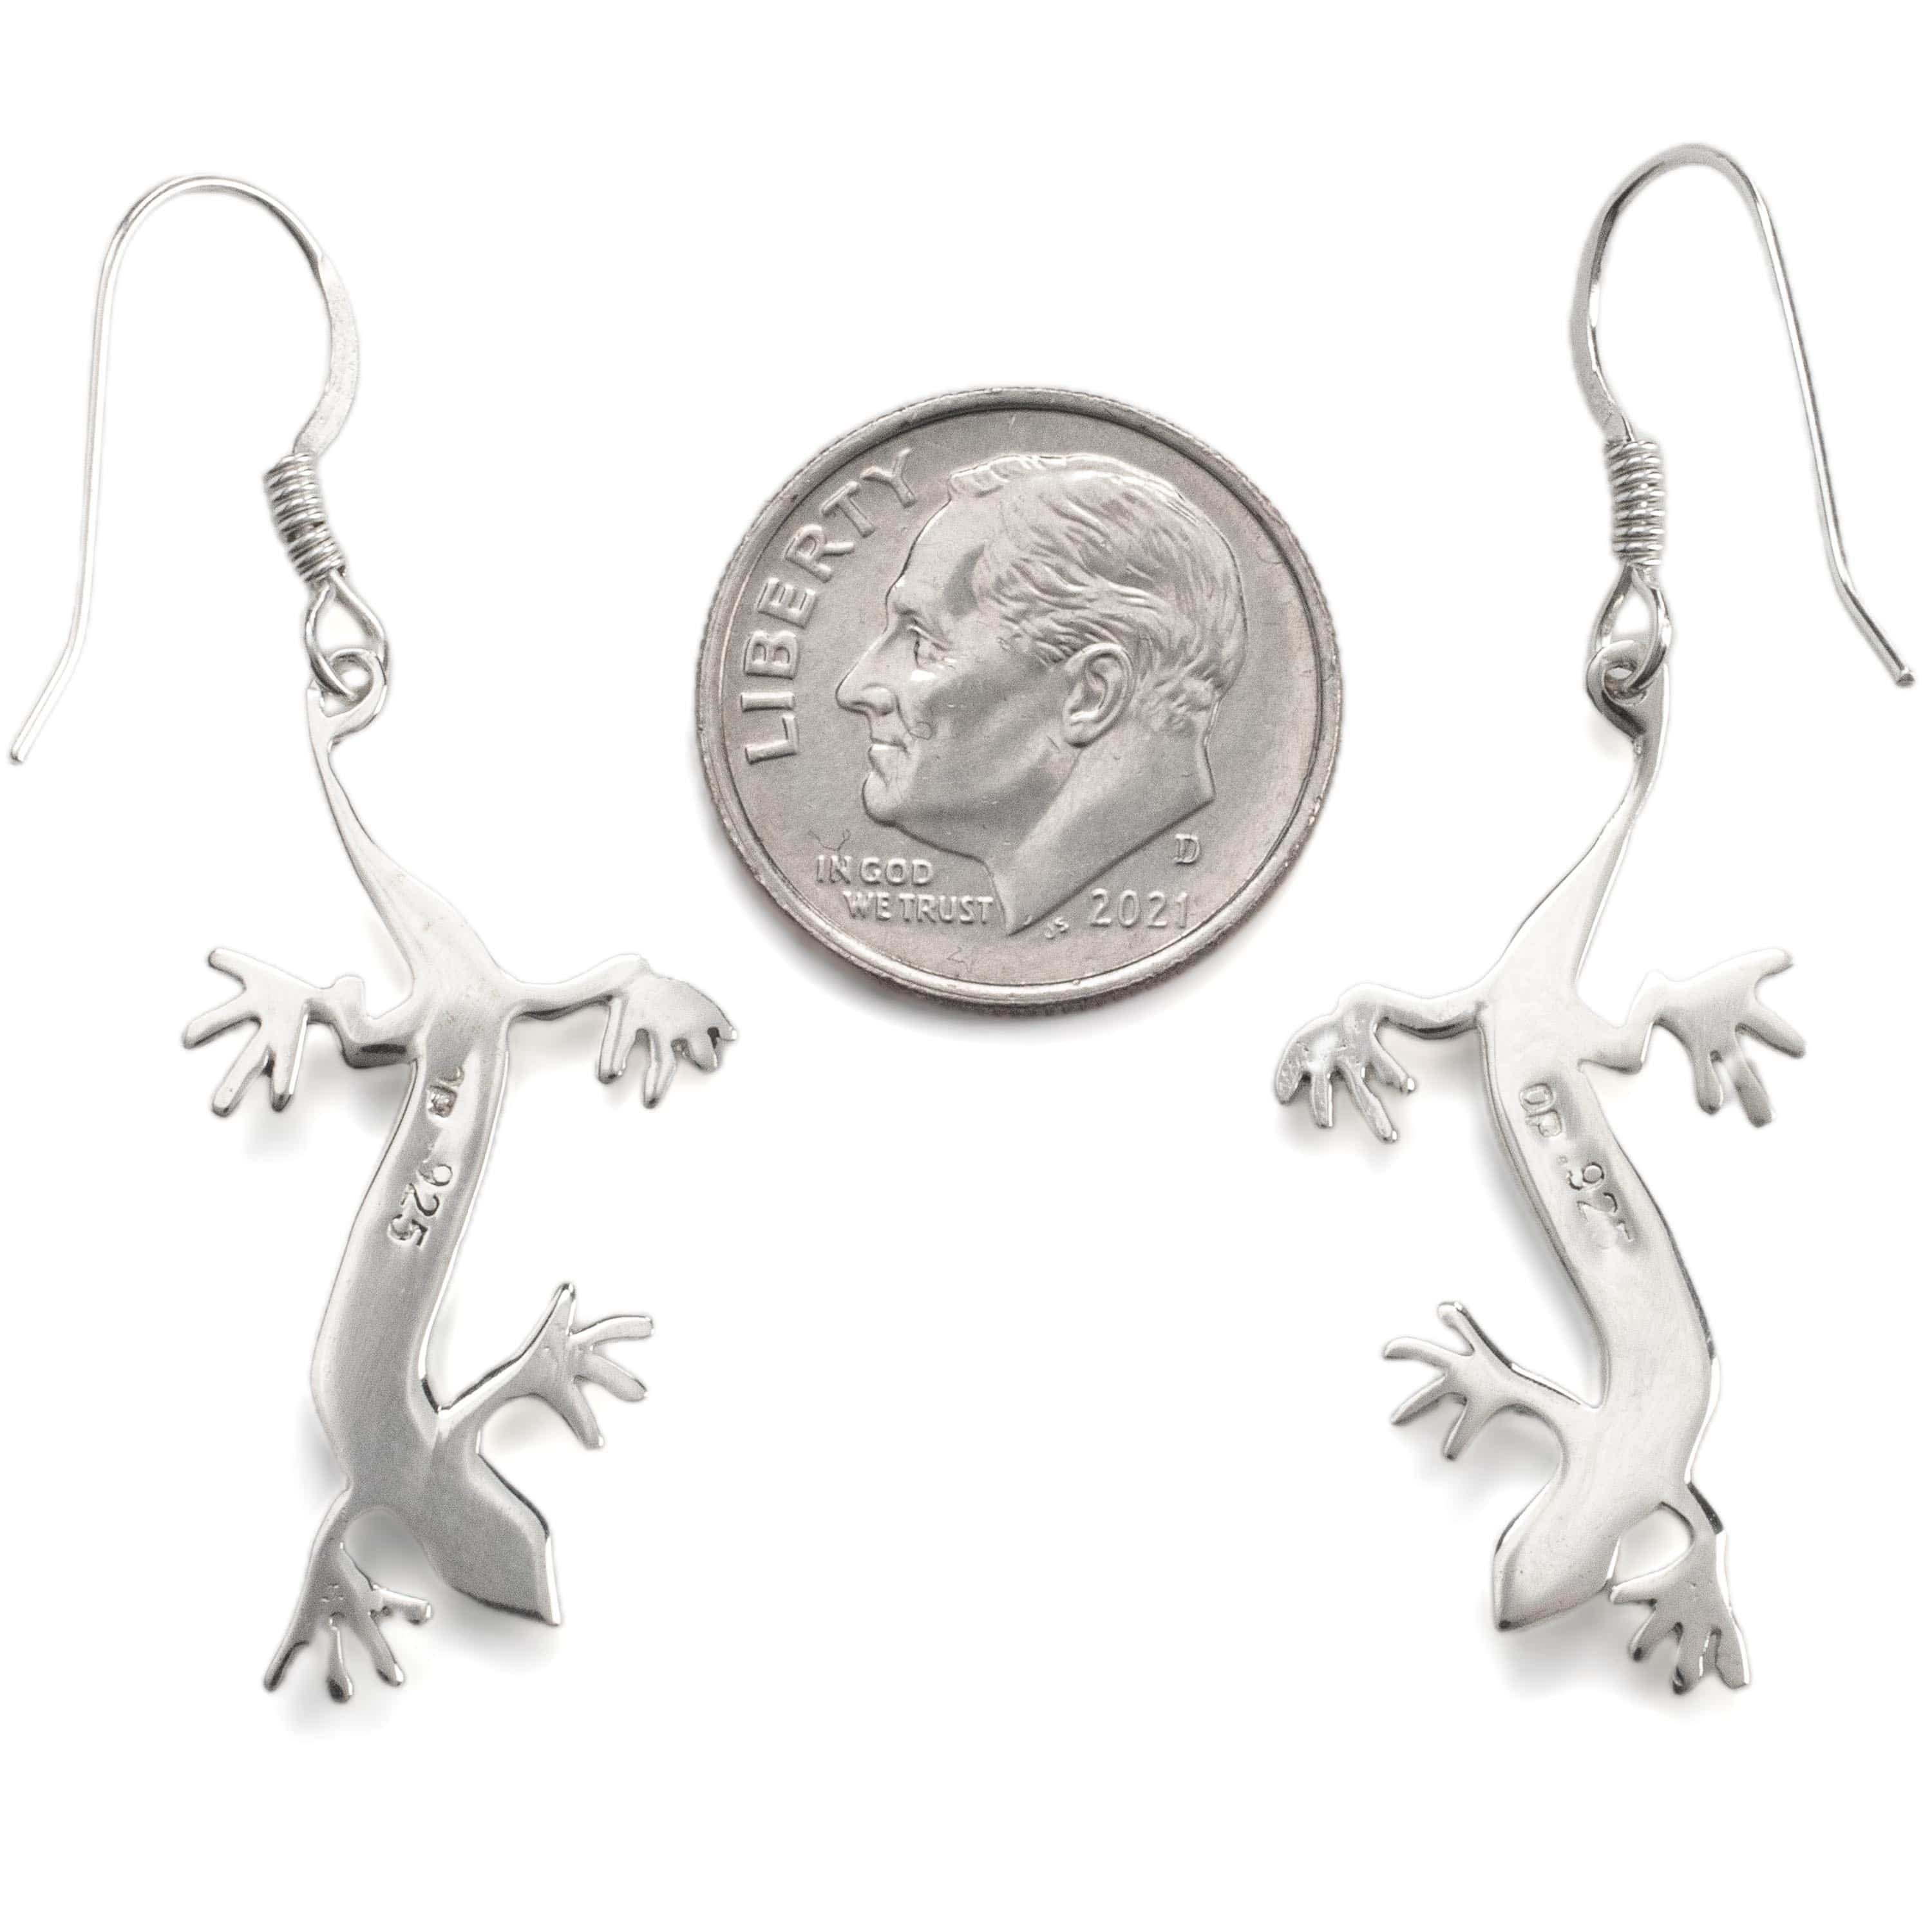 Kalifano Southwest Silver Jewelry Turquoise Lizard Earrings Handmade with Sterling Silver and Opal Accent NME.2164.TQ